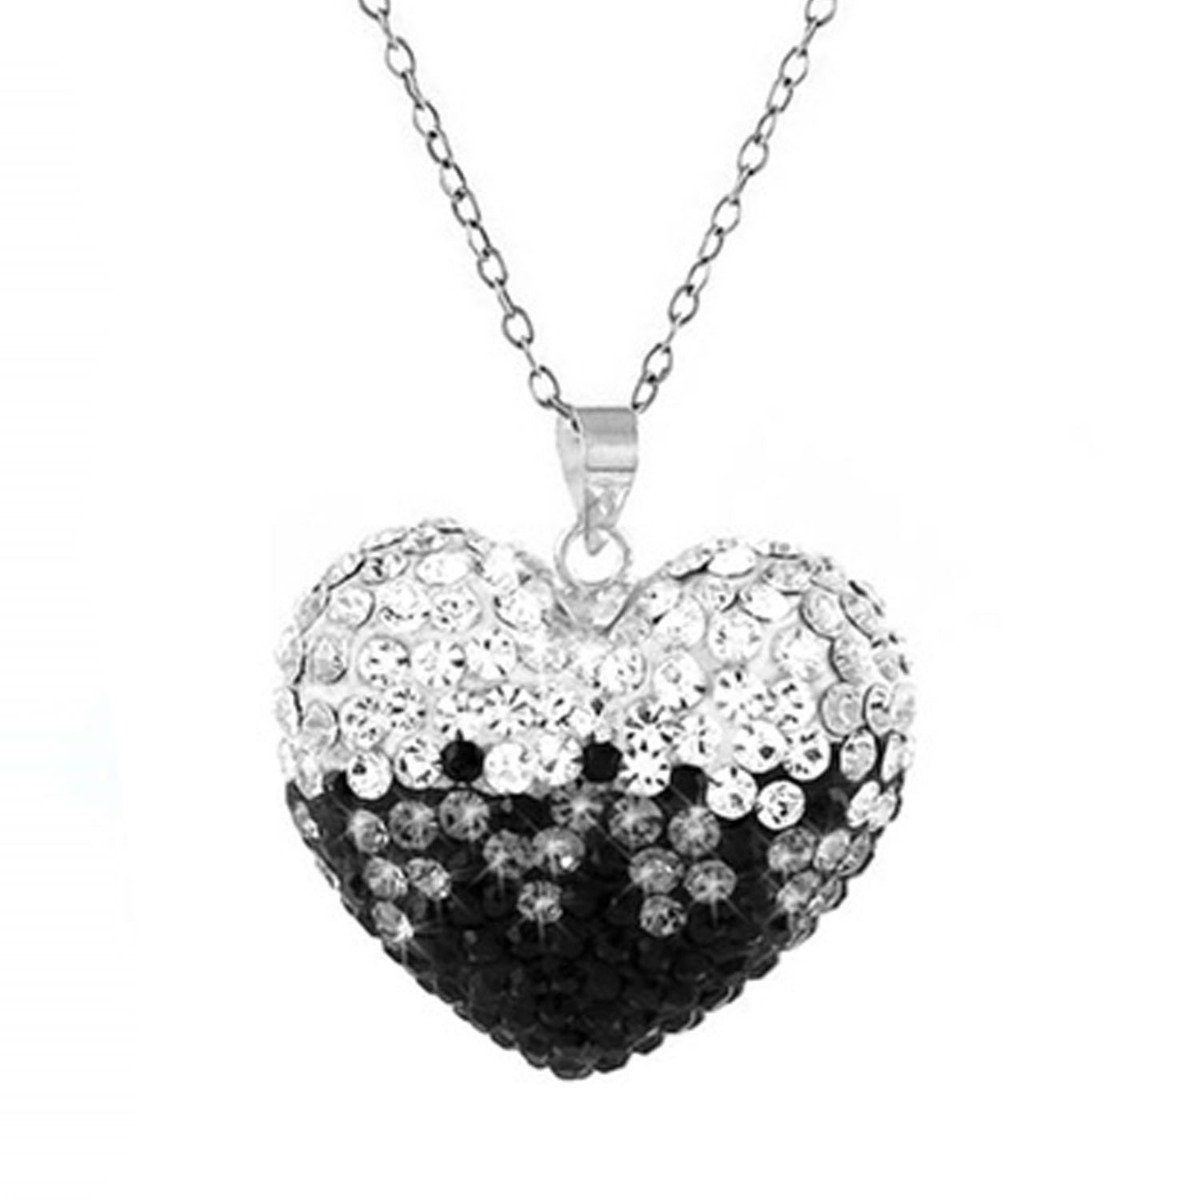 Black and White Bubble Heart Necklace with Swarovski Elements